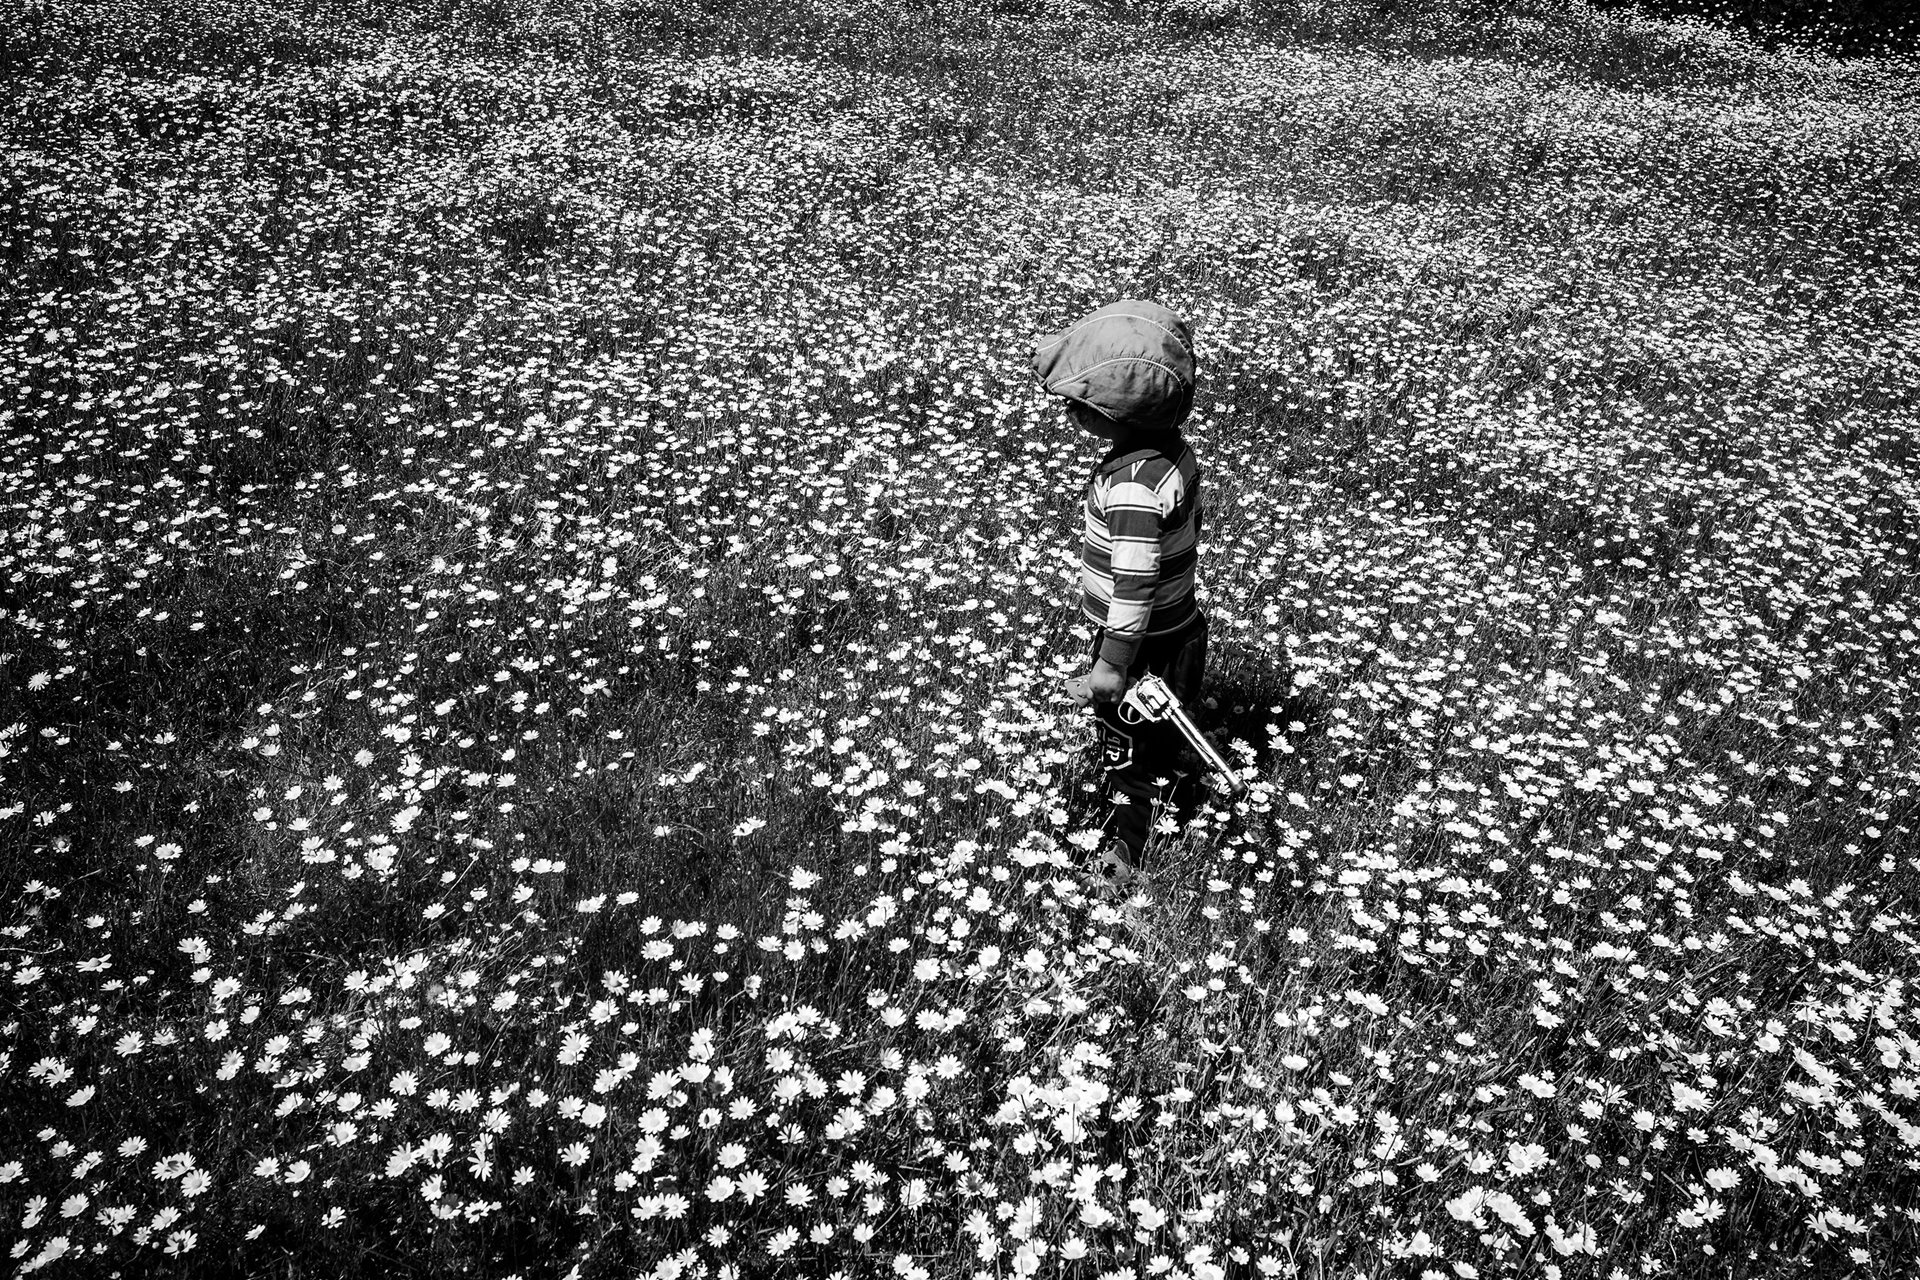 A boy with a toy gun walks through a field of flowers, in territory recovered by the Mapuche community in Ercilla, Araucanía, Chile.